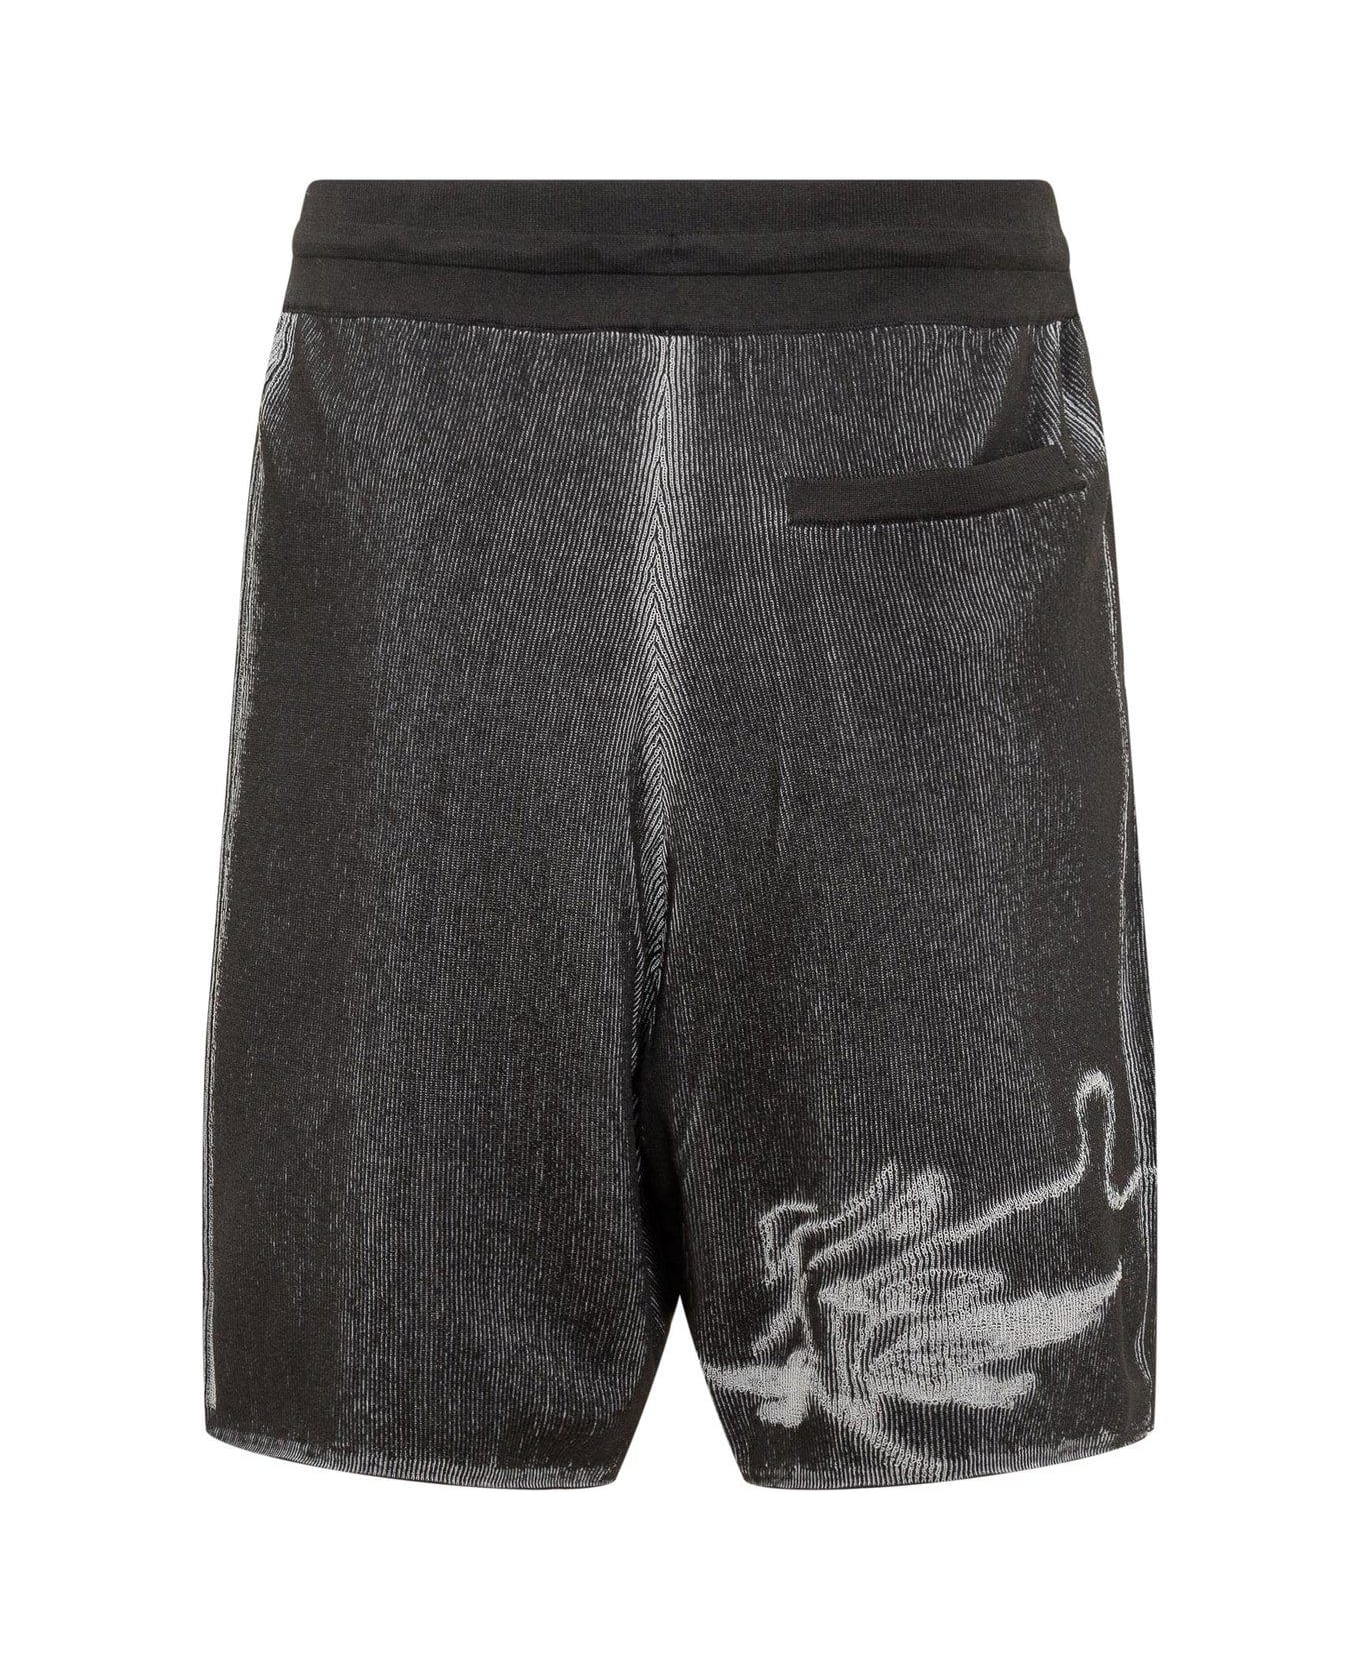 Y-3 Gfx Relaxed Fit Knit Shorts name:468